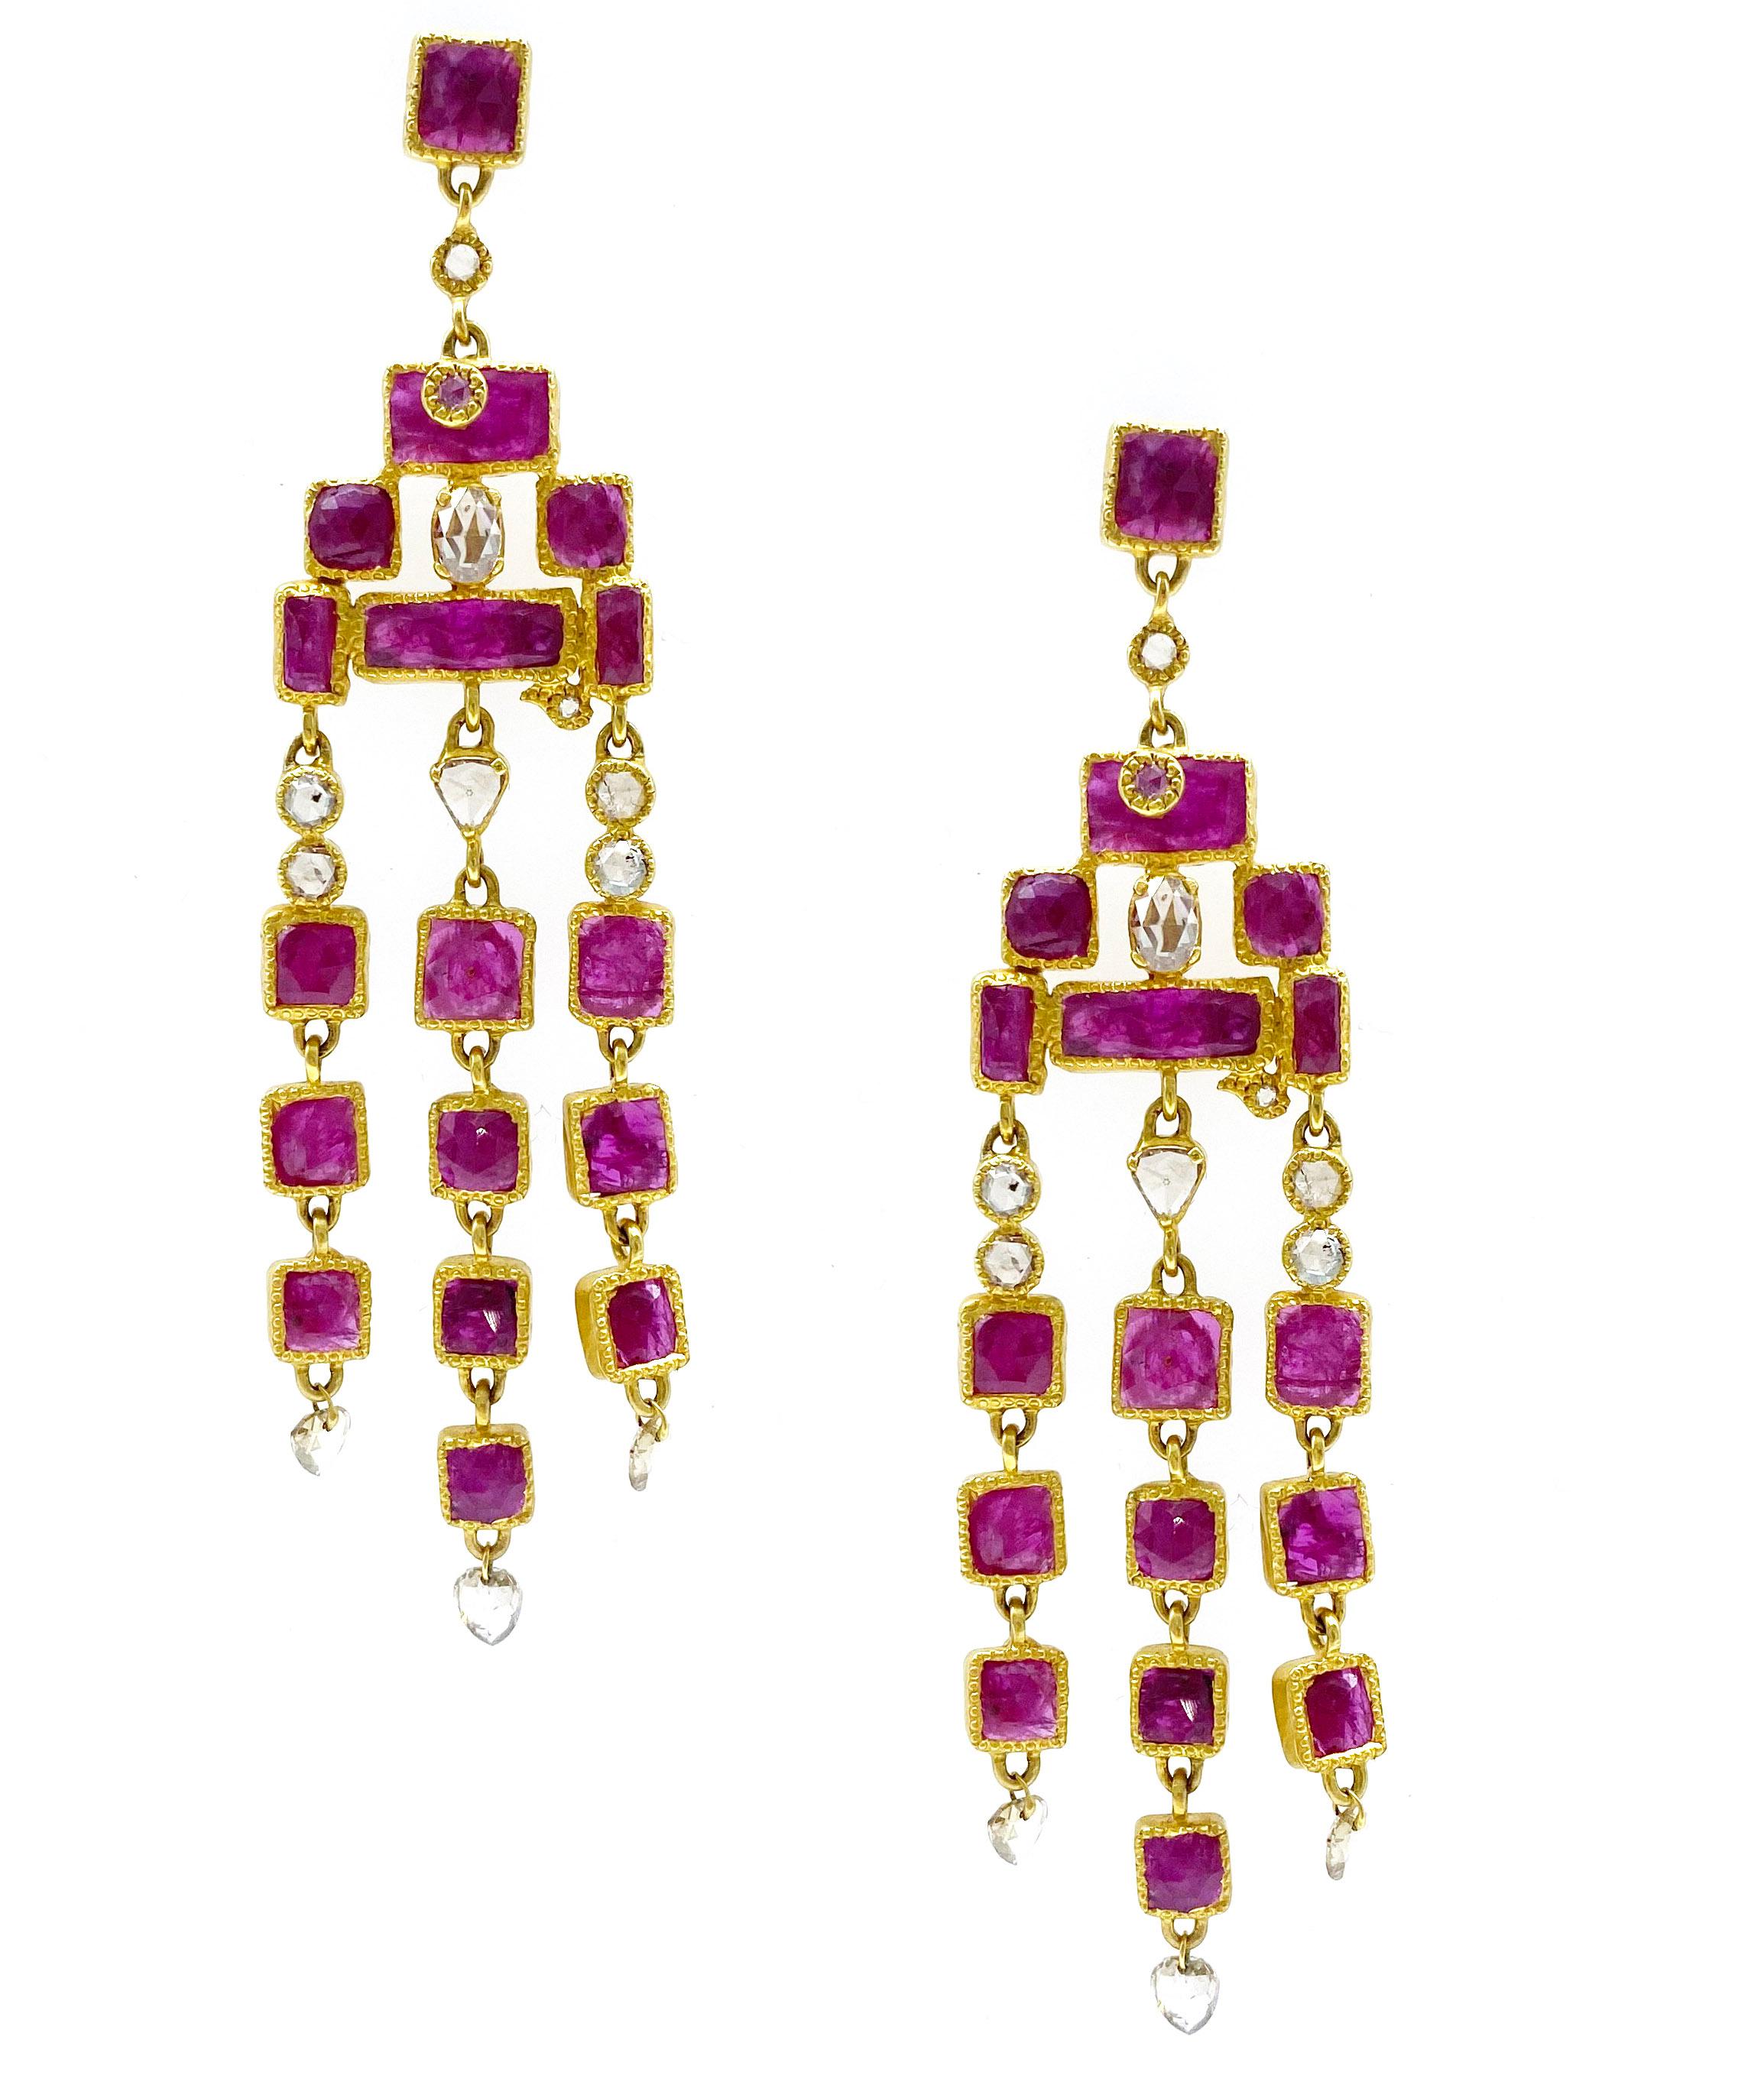 Spectacular Coomi Waterfall Drop Earrings crafted in 20K yellow gold showcasing Ruby at 16.68cts, and Diamond 1.83cts brought to you from the luminosity collection that consists of bold design and reflects light from within. Please contact us for